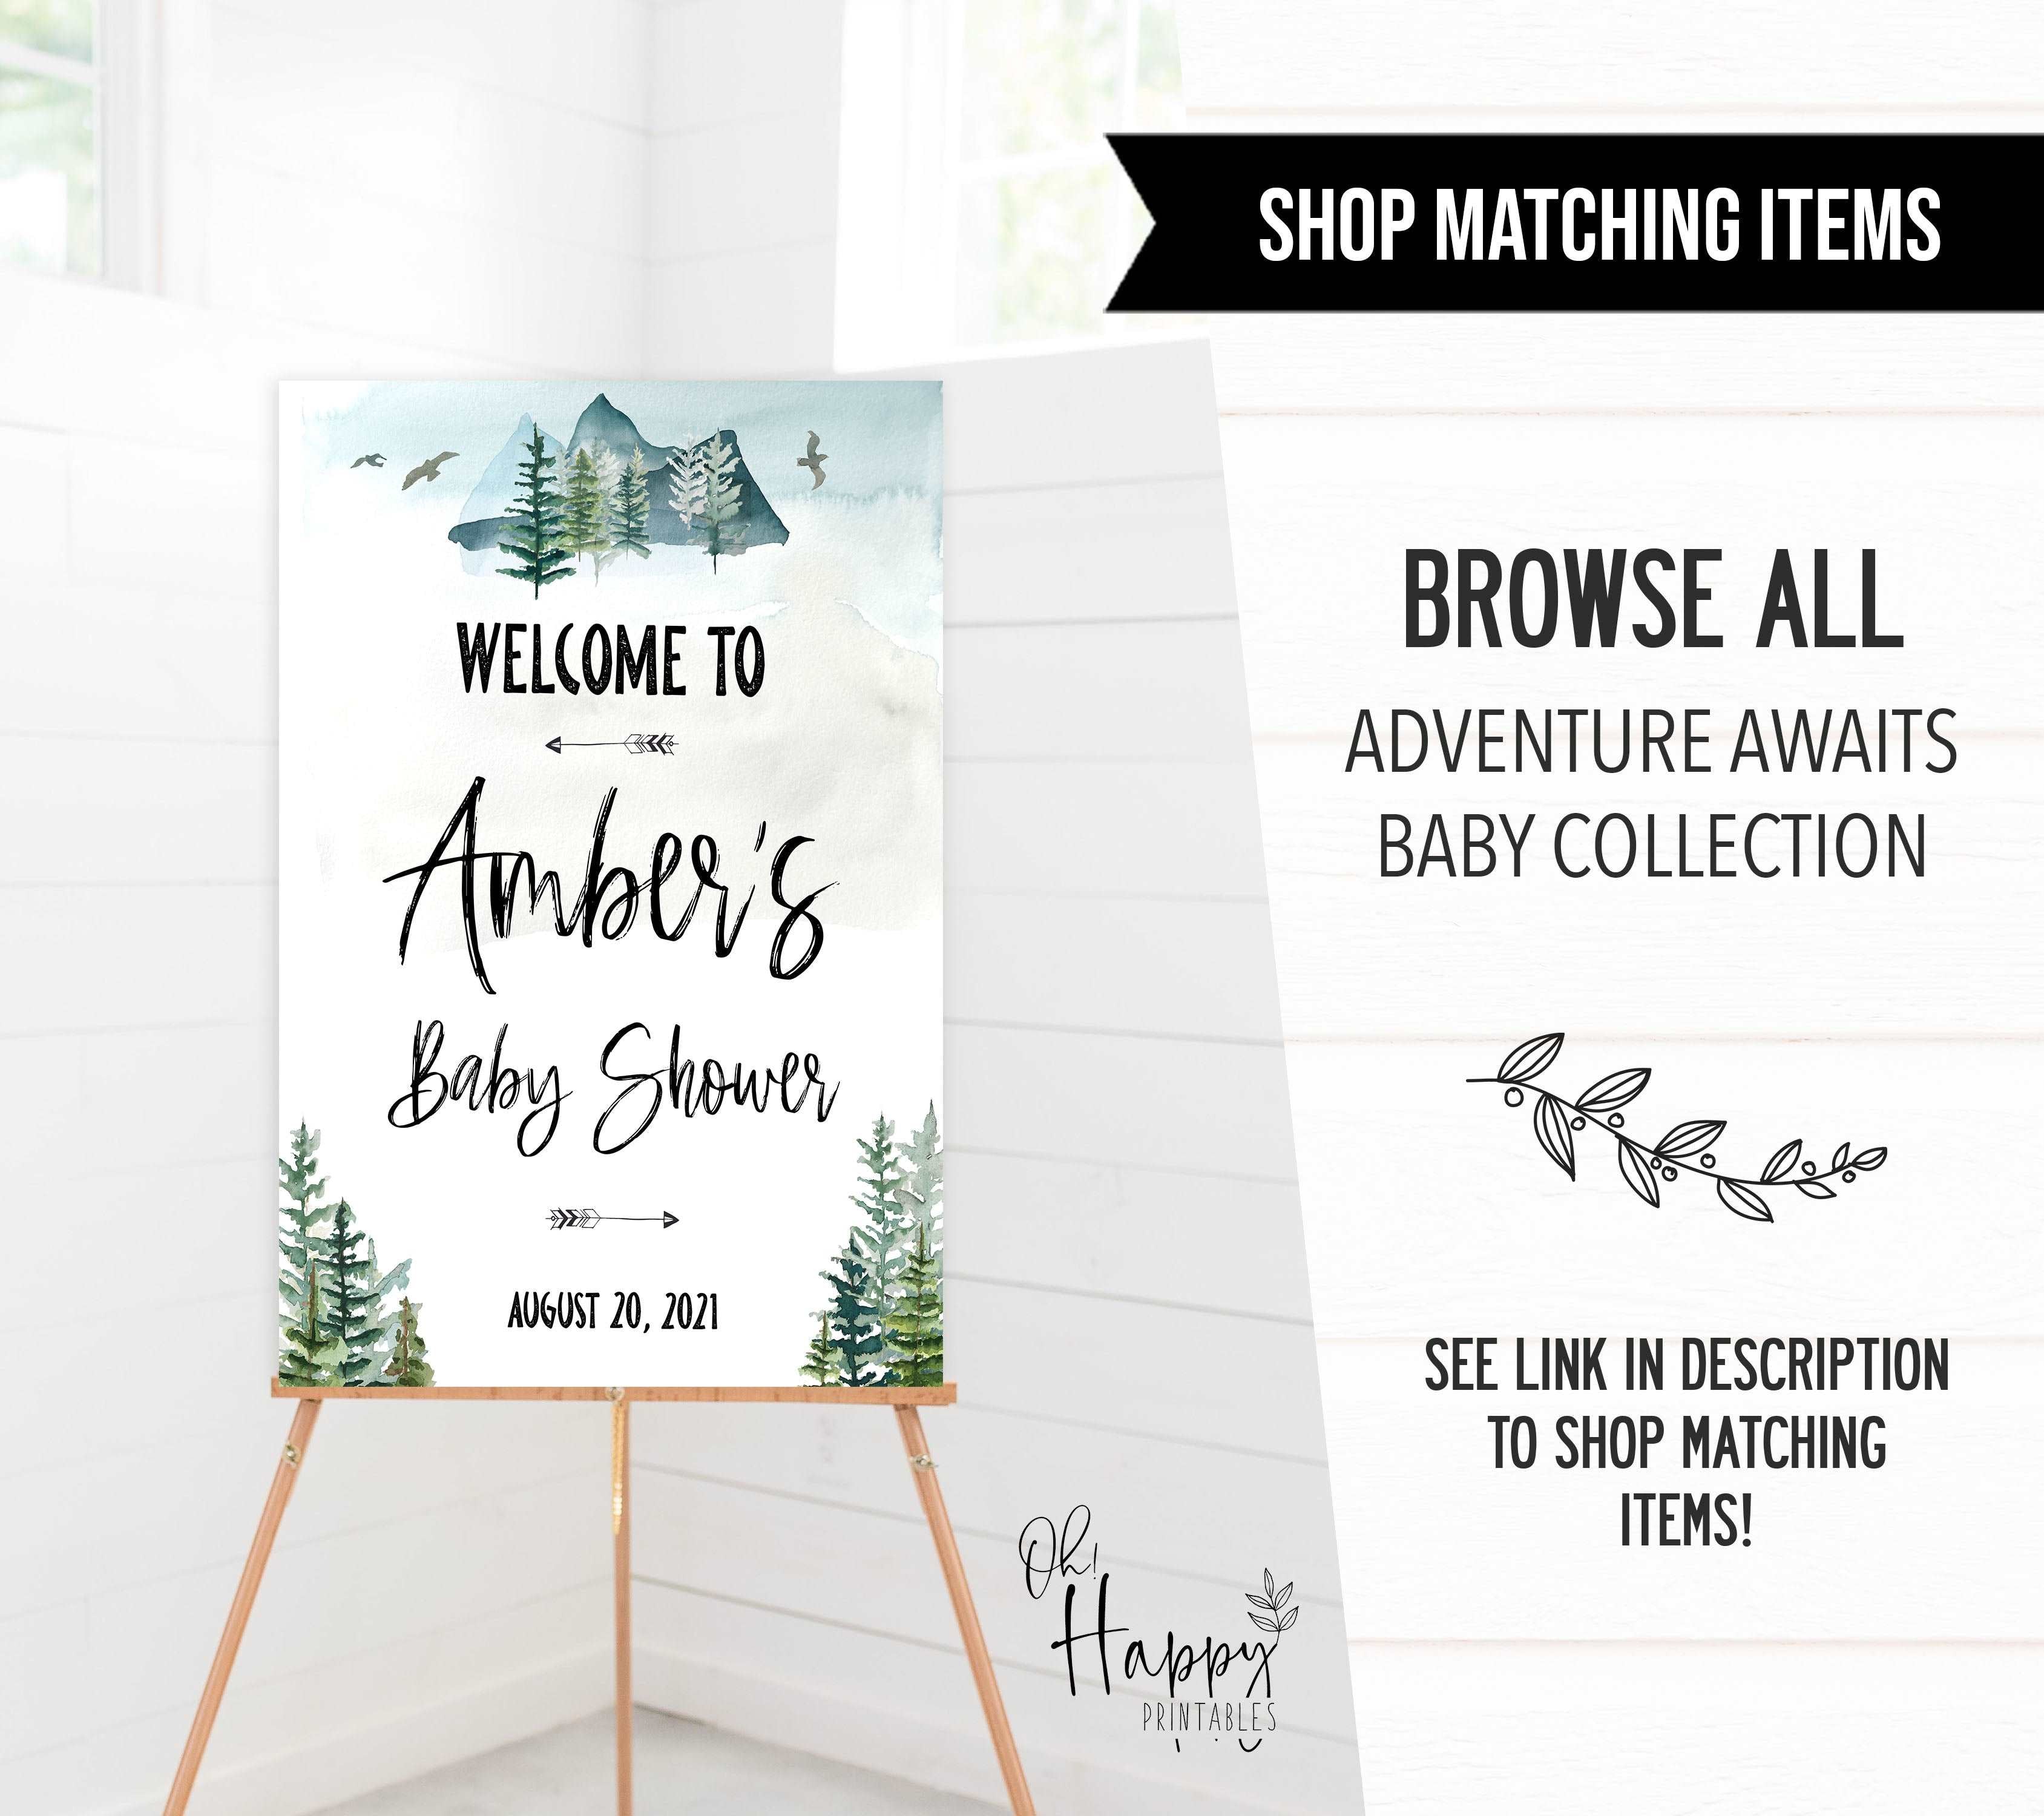 10 baby shower games, Printable baby shower games, adventure awaits baby games, baby shower games, fun baby shower ideas, top baby shower ideas, adventure awaits baby shower, baby shower games, fun adventure baby shower ideas